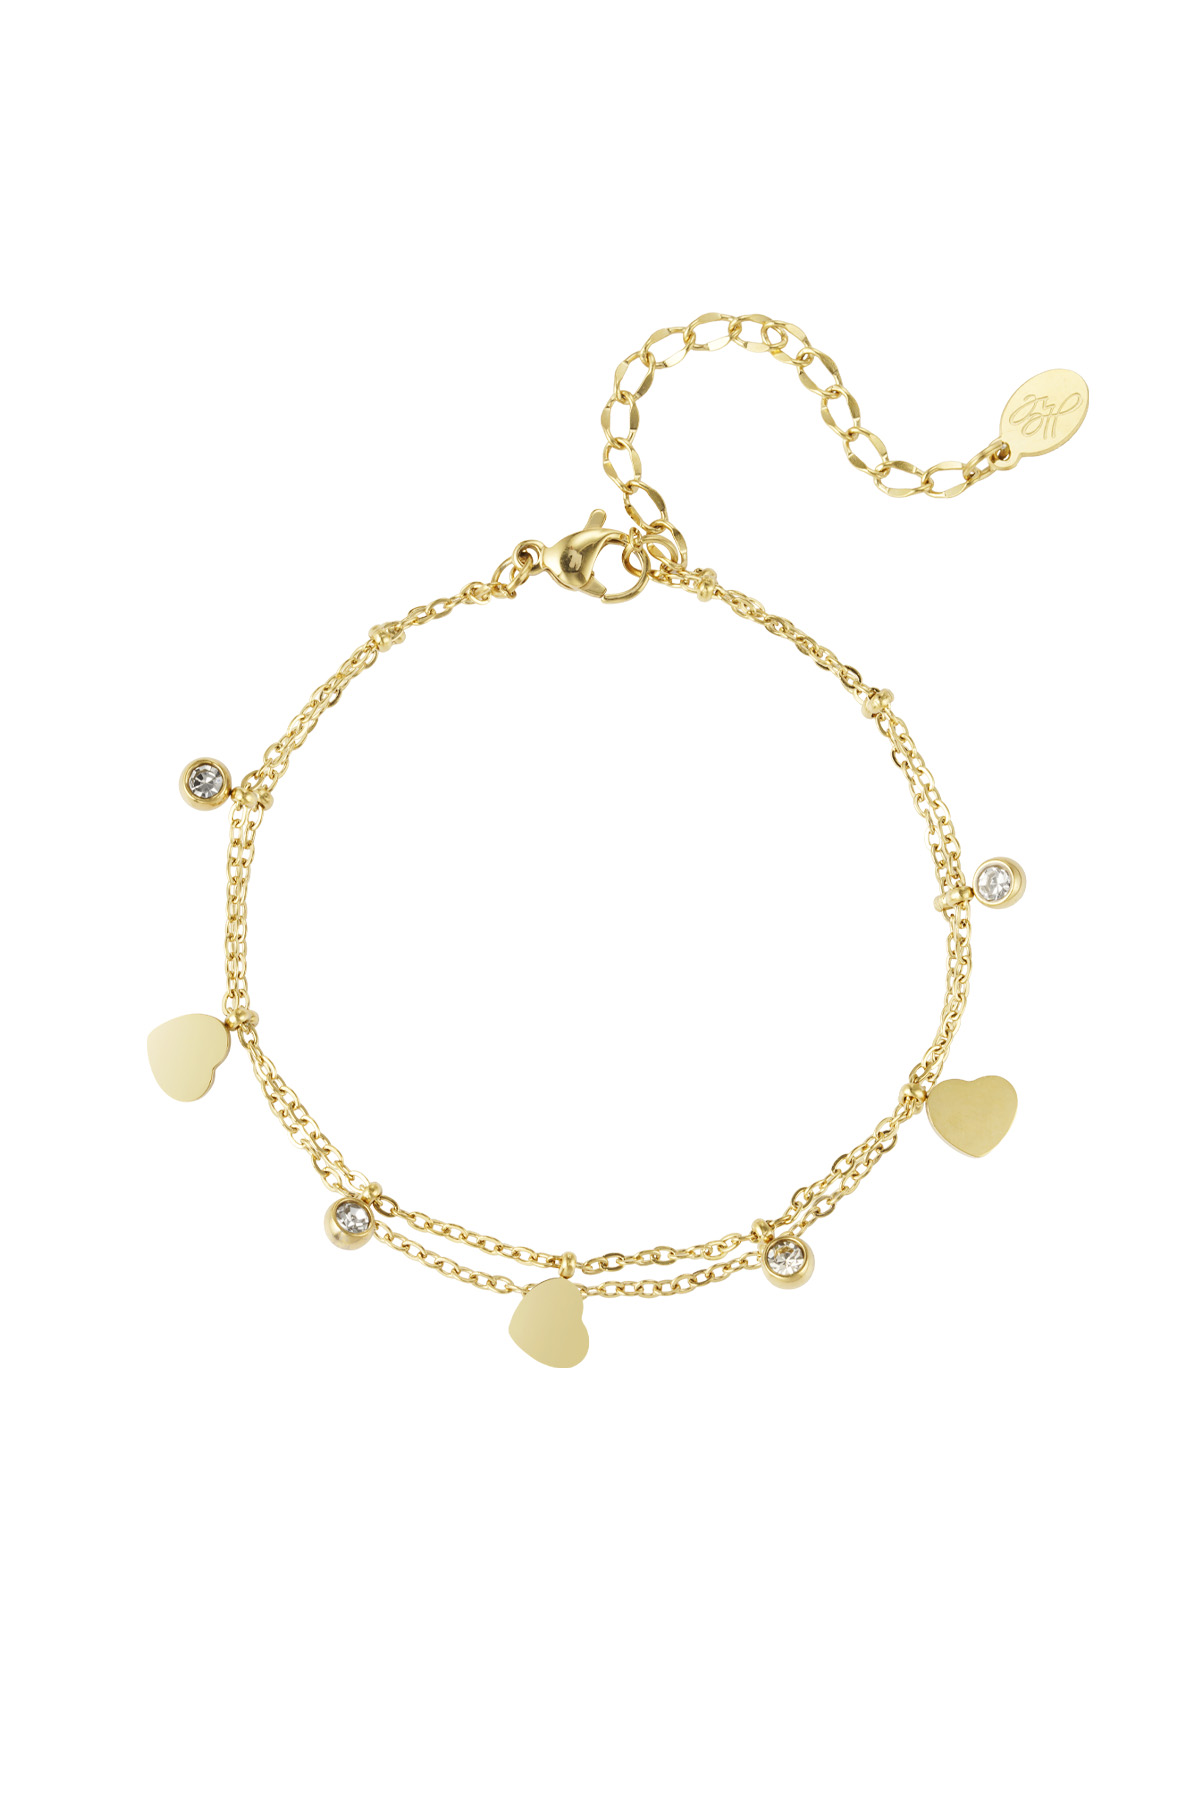 Charm bracelet with hearts and diamonds - gold